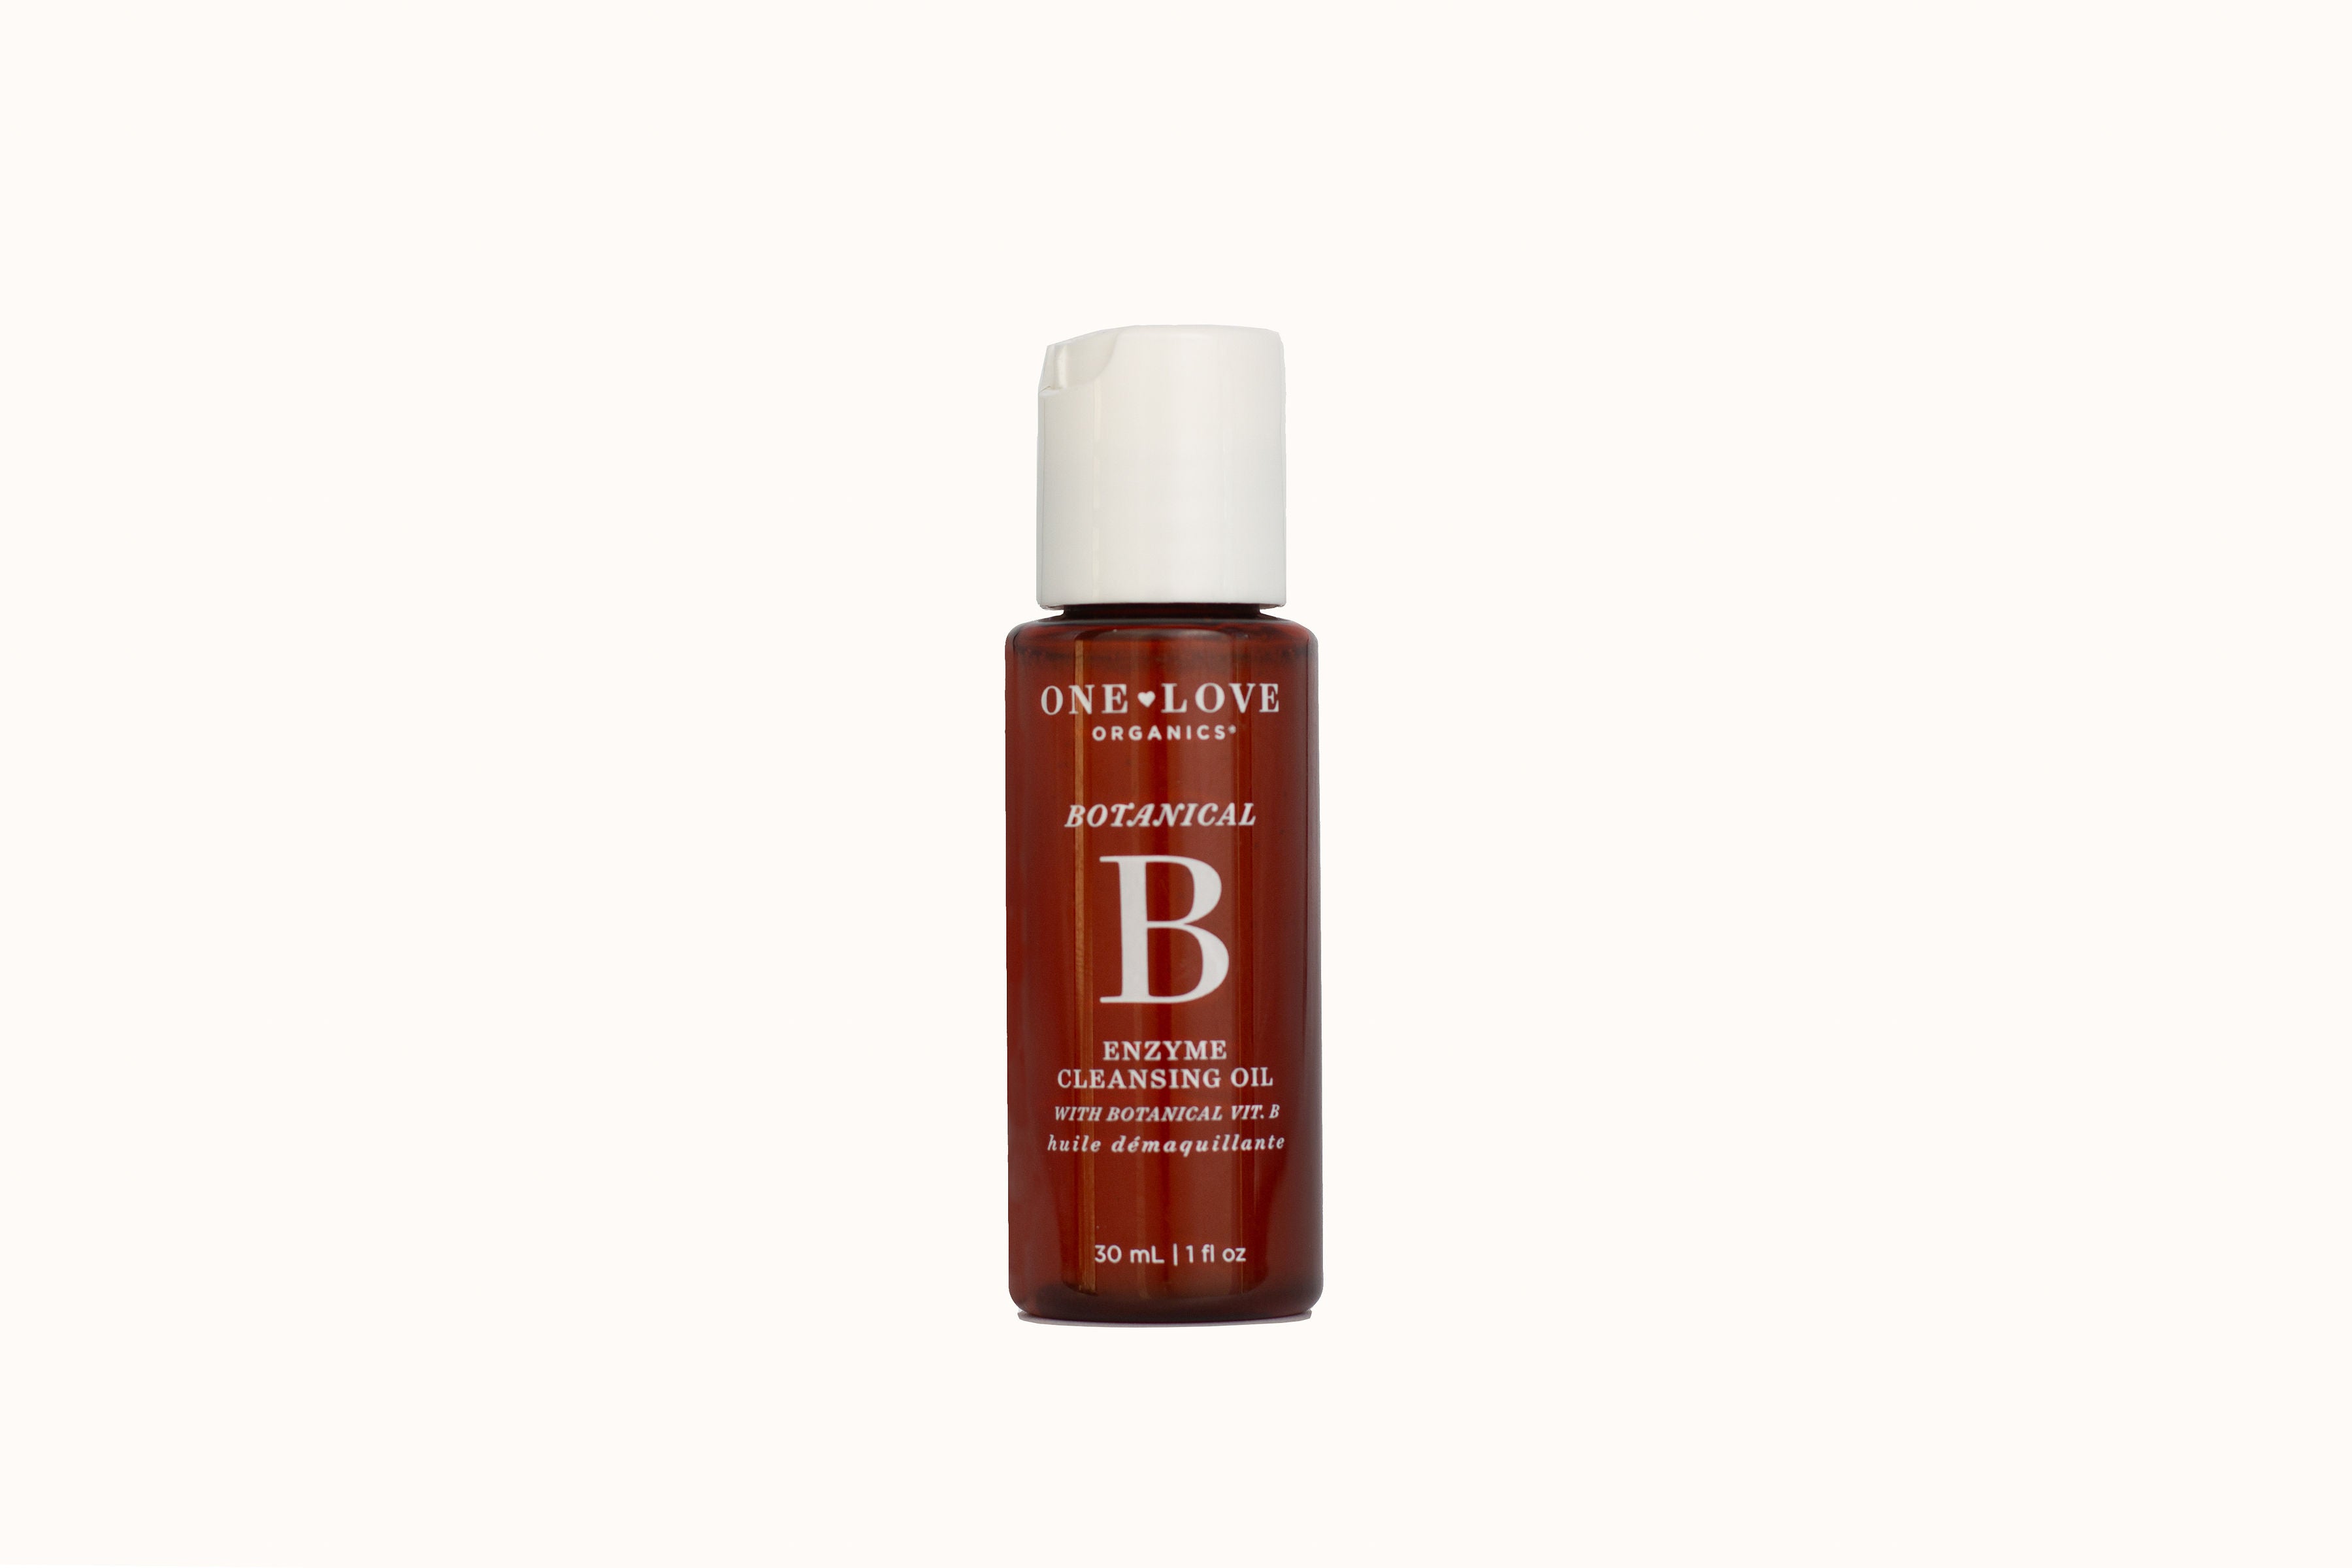 Botanical B Enzyme Cleansing Oil Travel Size